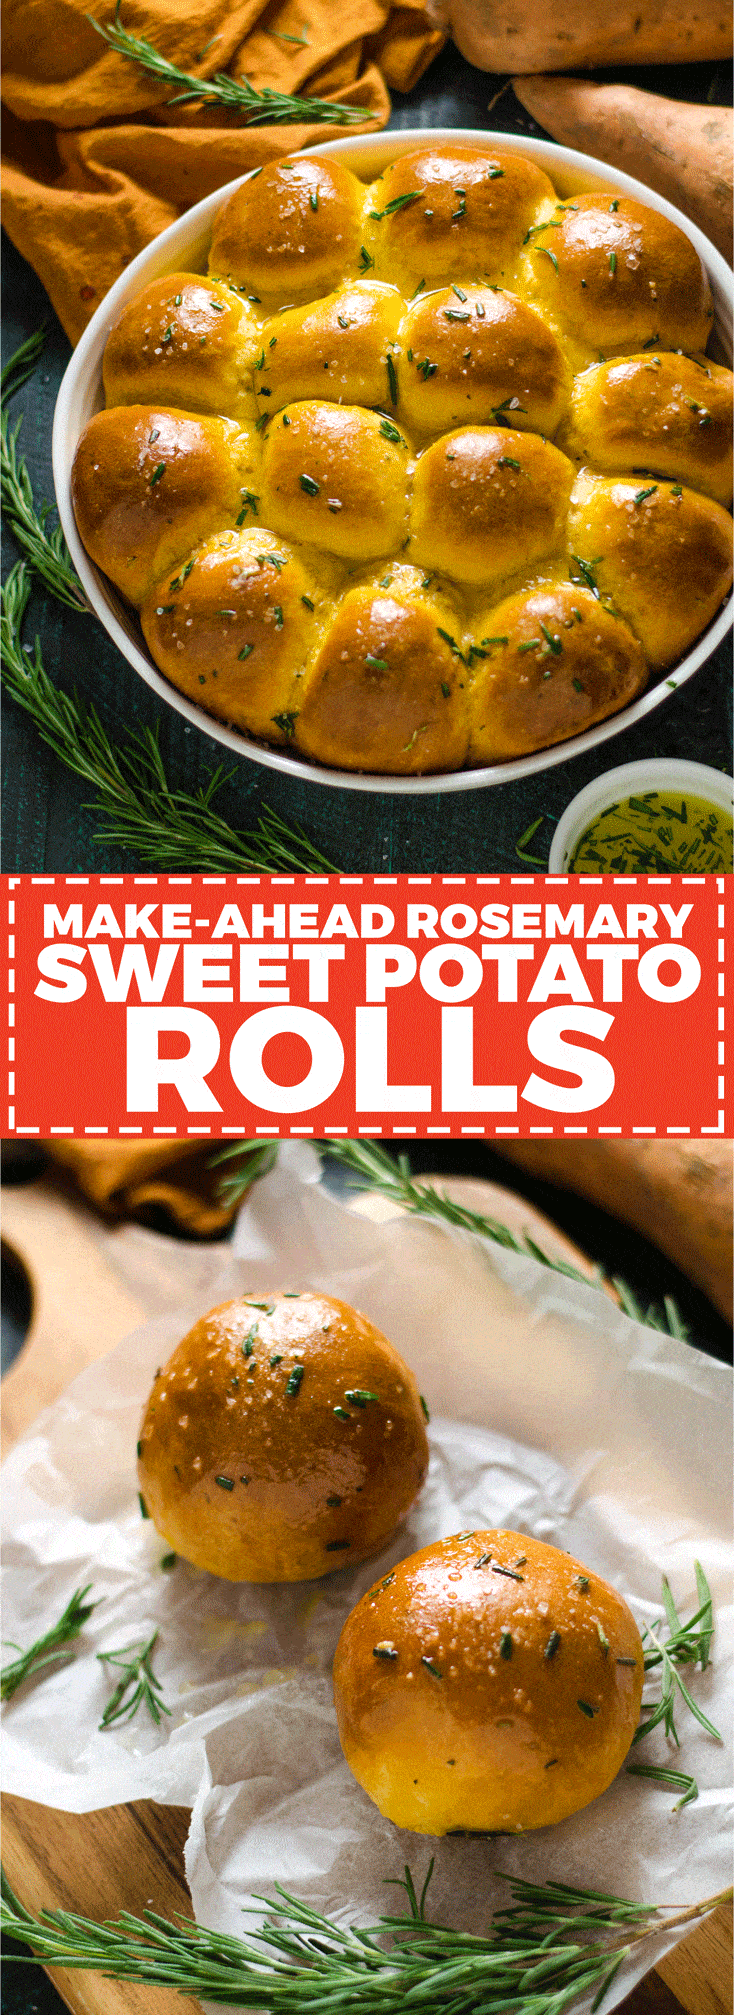 Make-Ahead Rosemary Sweet Potato Rolls. These fluffy, flavorful rolls are not only fool-proof, but they're also easy to make in advance (in several different ways, because who doesn't love options?). Your holiday dinner guests are going to love them. | hostthetoast.com